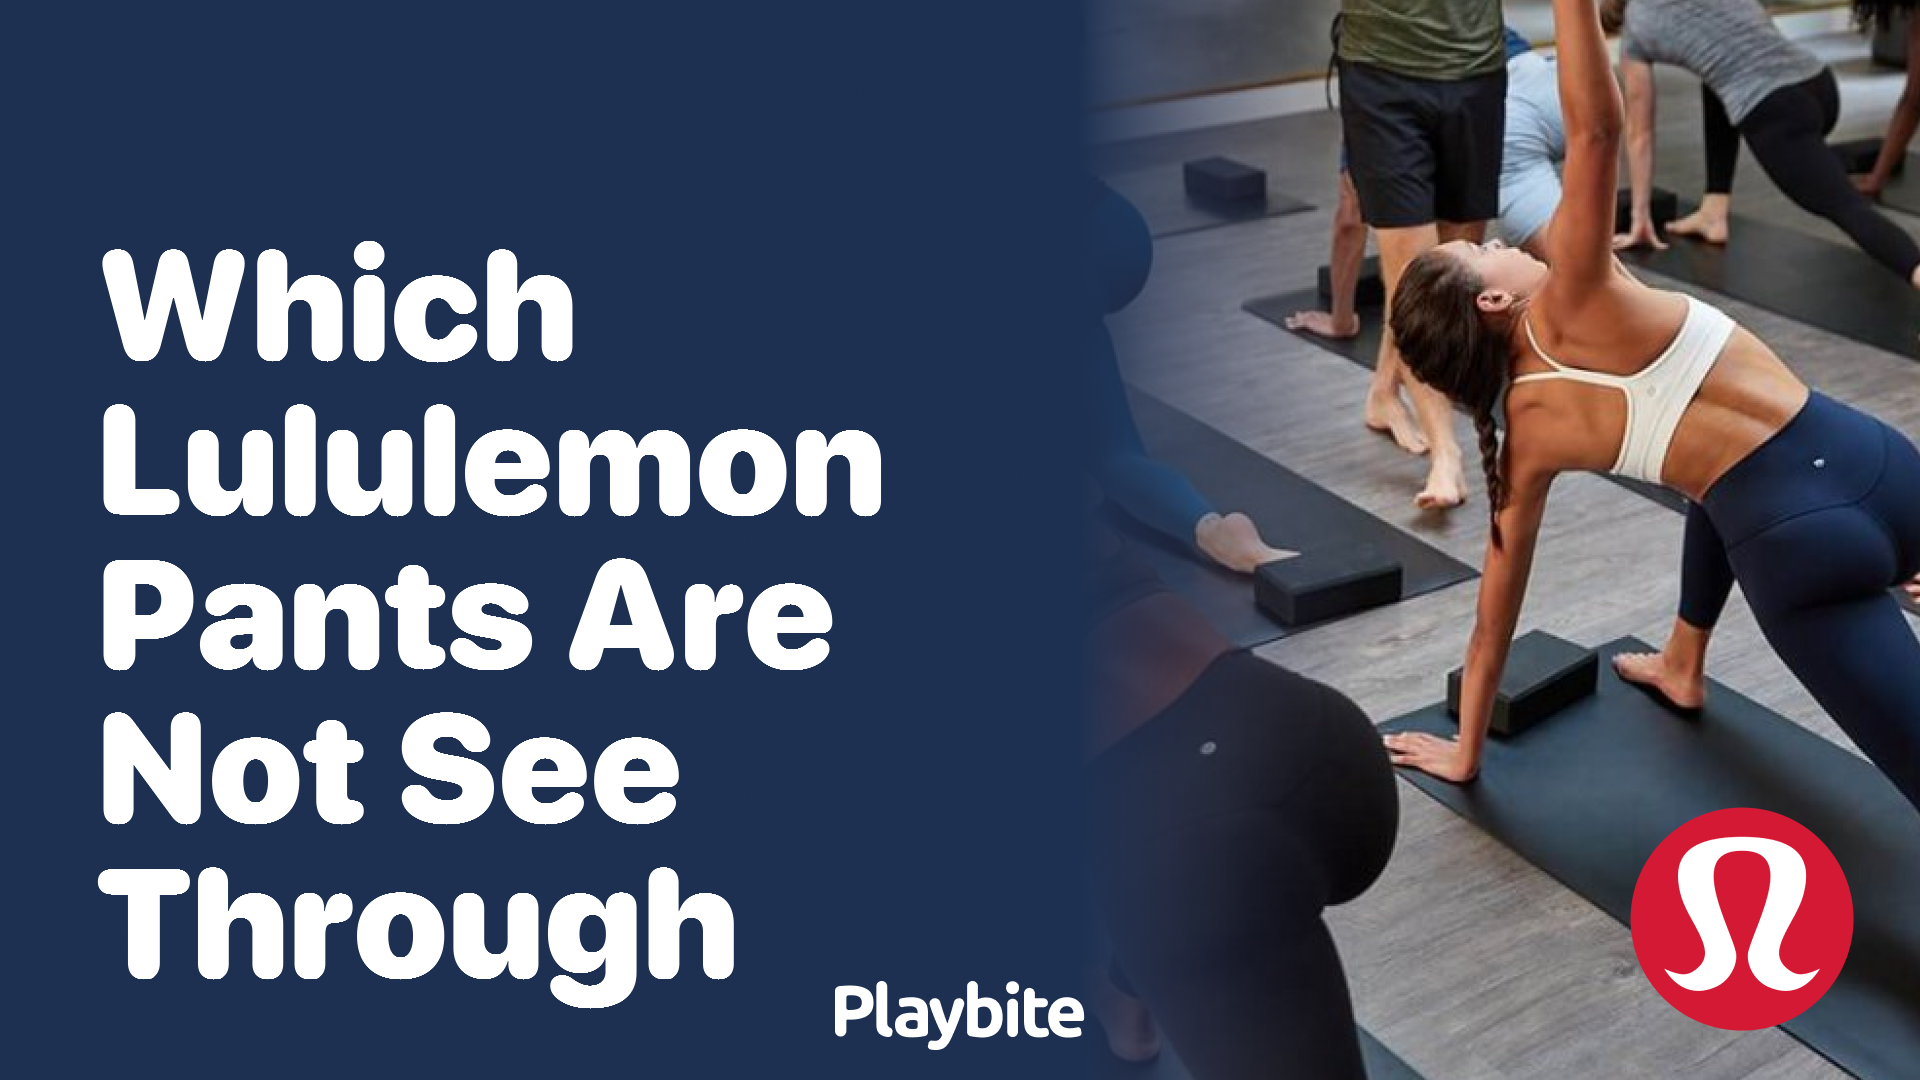 Which Lululemon Pants Are Not See Through? - Playbite